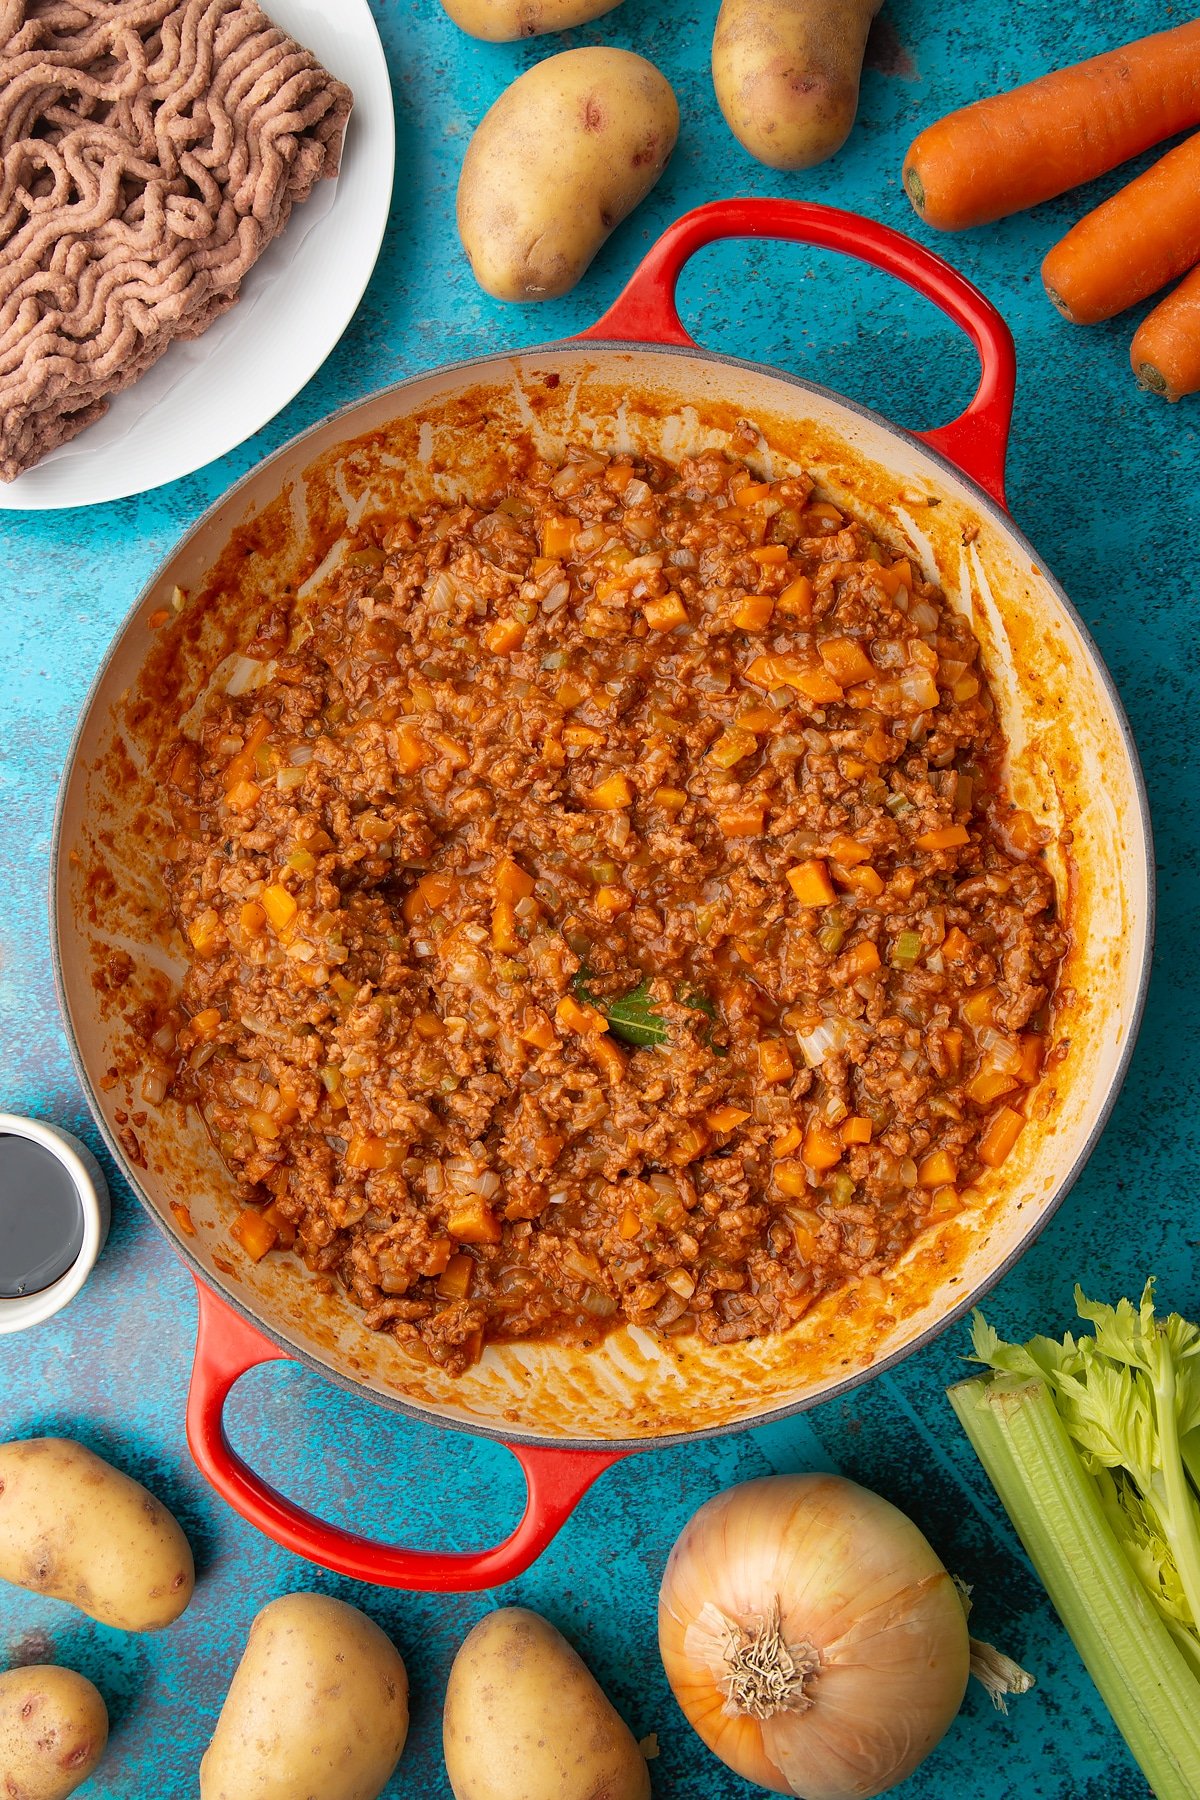 Meat free cottage pie filling in a large pan. Ingredients to make vegan cottage pie surround the pan.